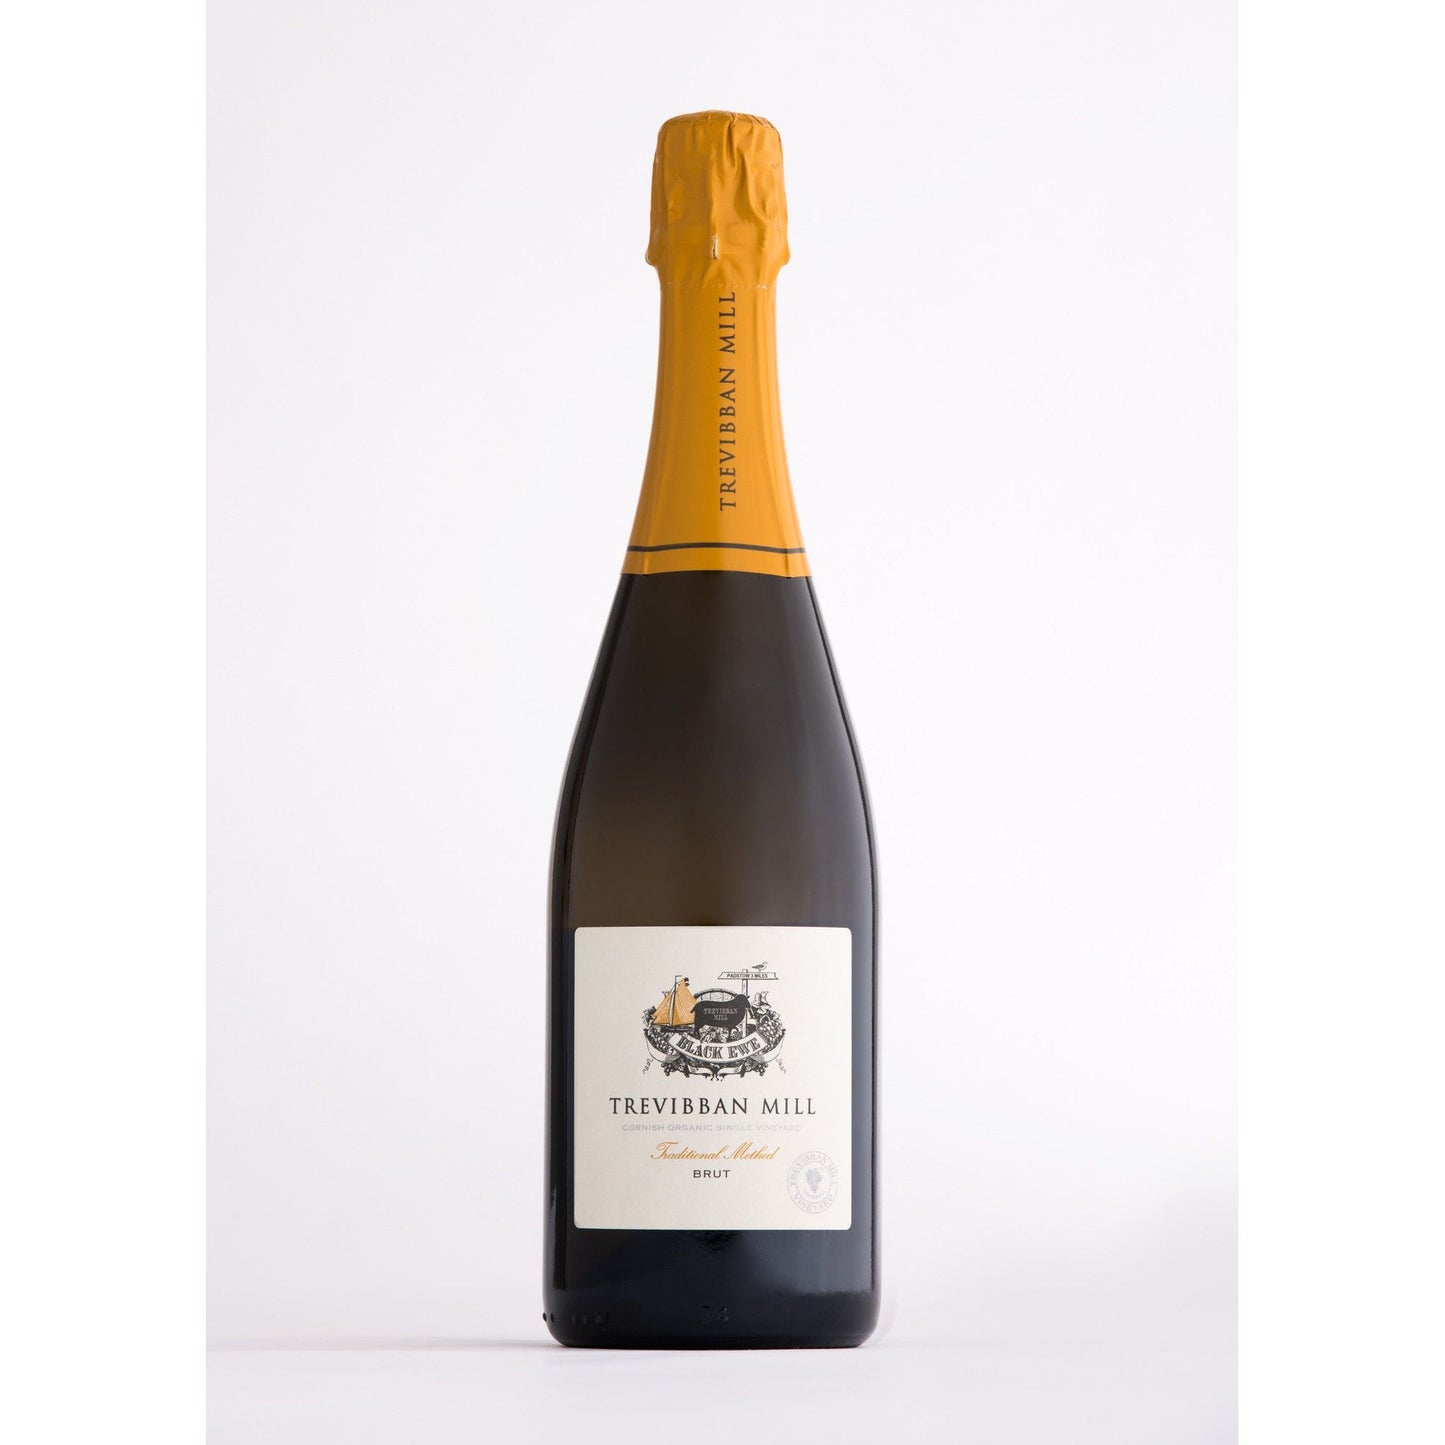 Trevibban Mill Sparkling White Brut English Sparkling Wine from the English Wine Collection